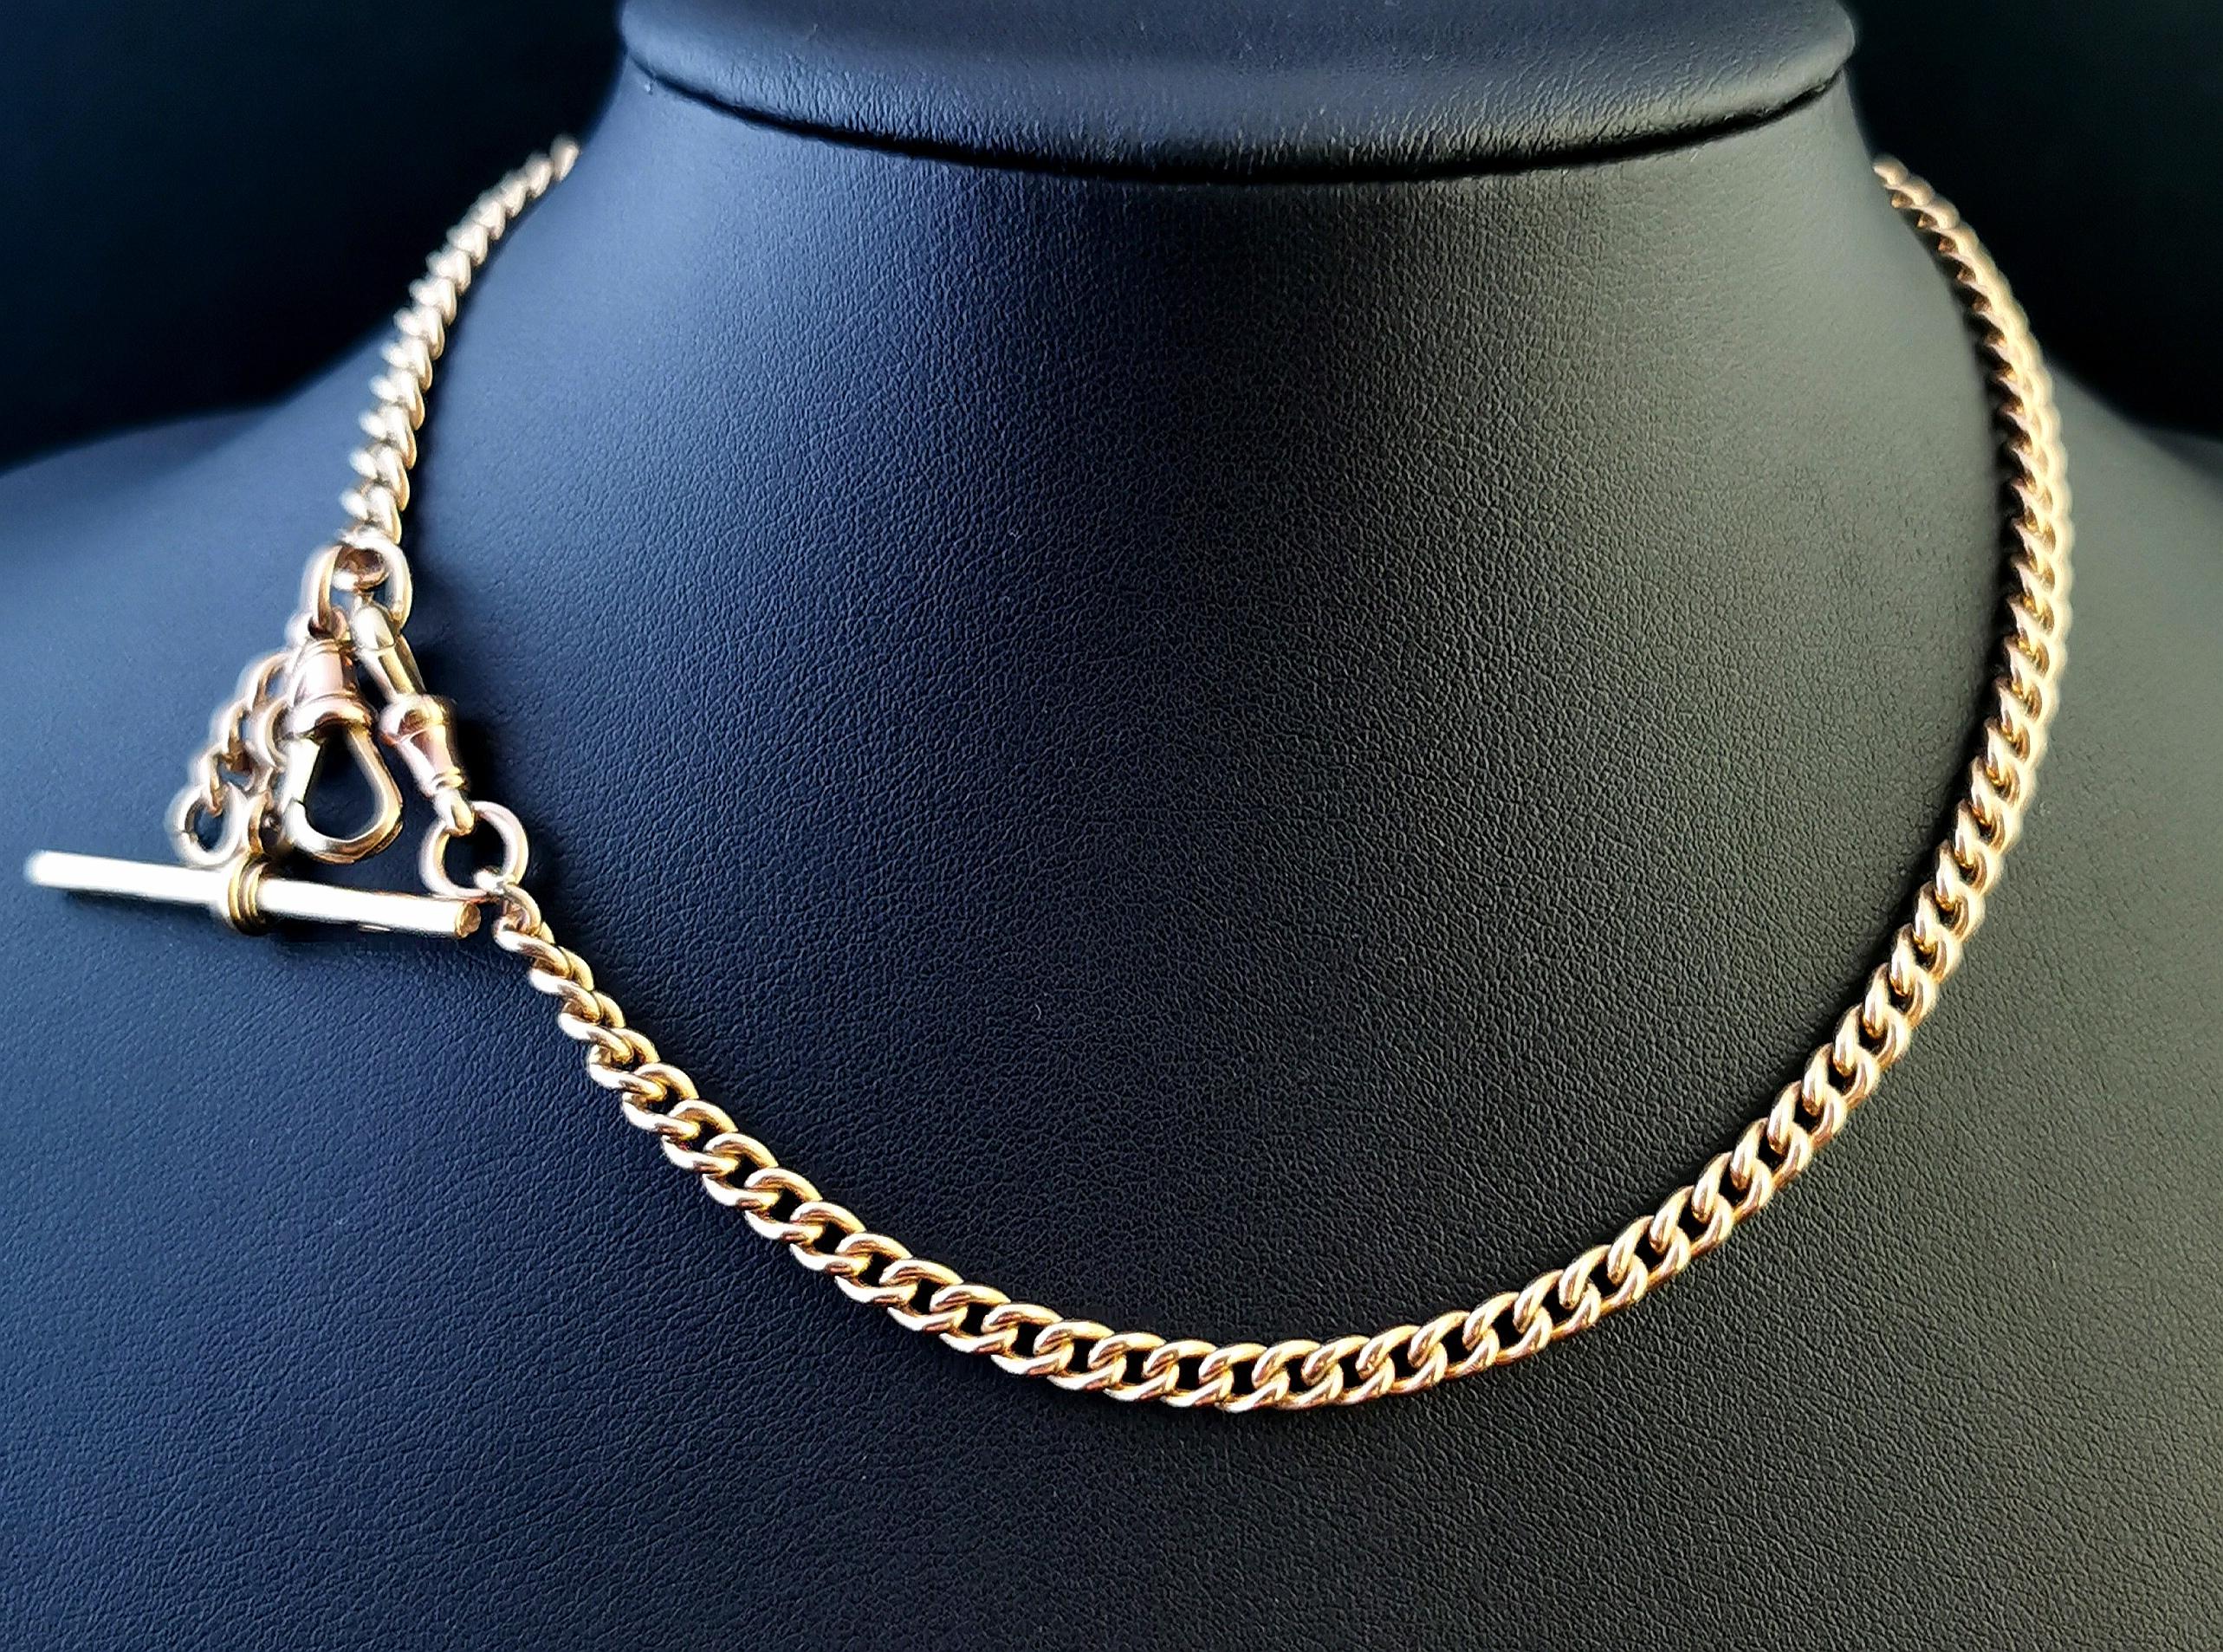 A gorgeous antique 9 karat yellow gold curb link watch chain or Albert chain, this is a longer length so could be used as a necklace.

It has slightly graduated rich yellow, solid gold links with a very slight rosey hue, it is always harder to find